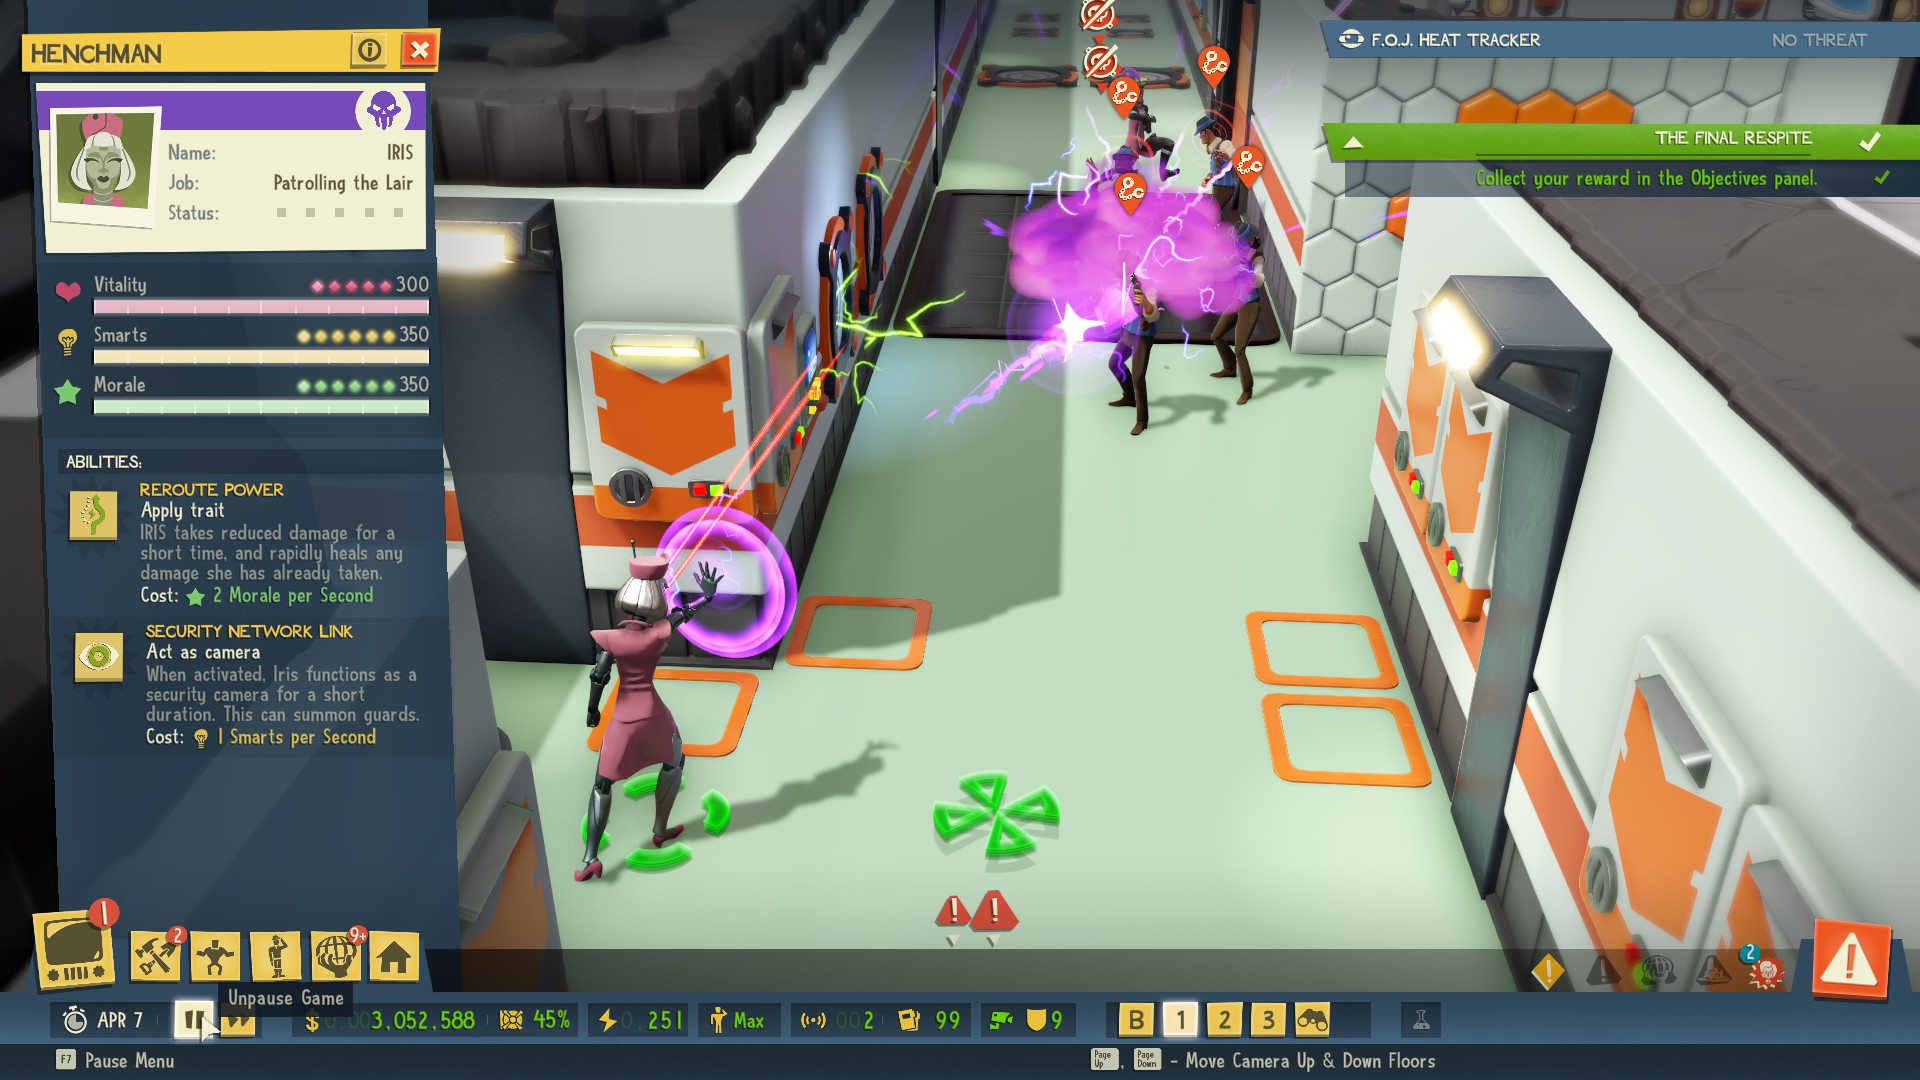 Evil Genius 2 Full Game Overview Guide image 651